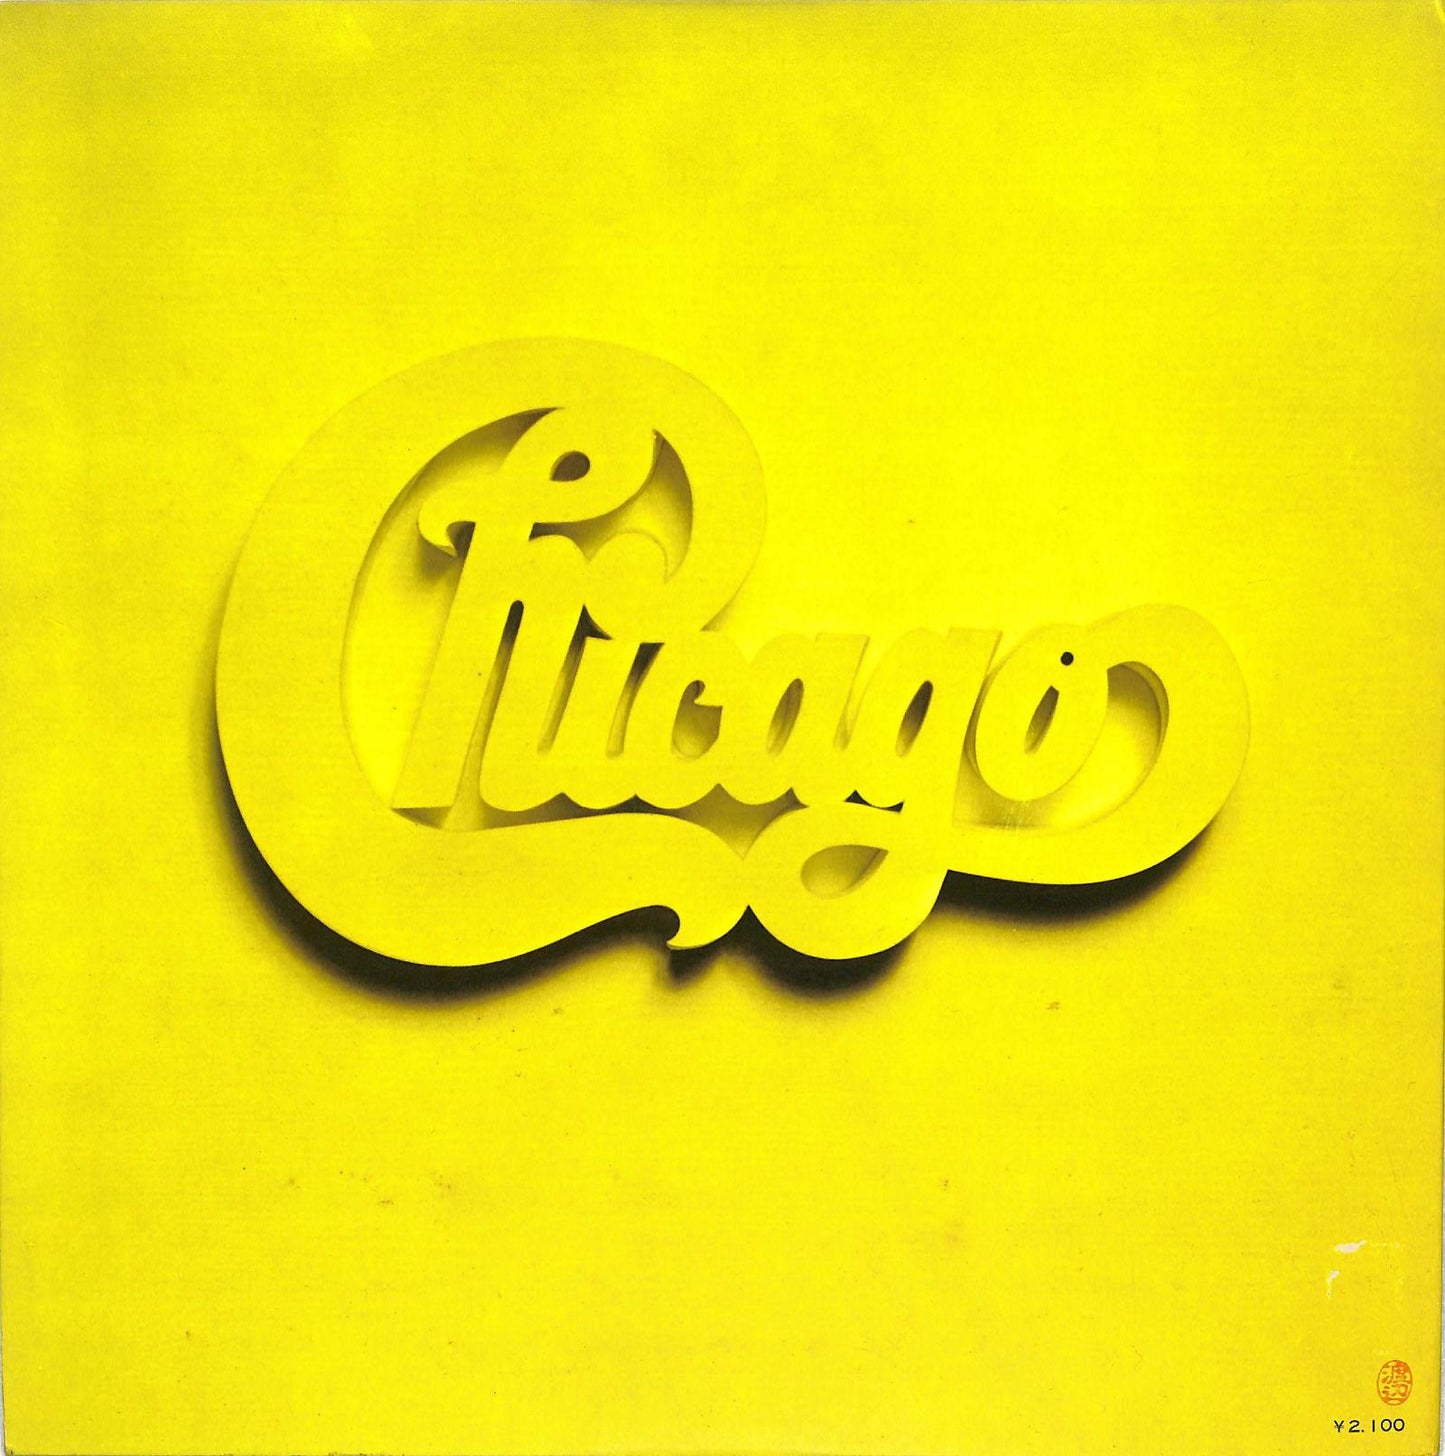 CHICAGO - The Great Chicago At Carnegie Hall